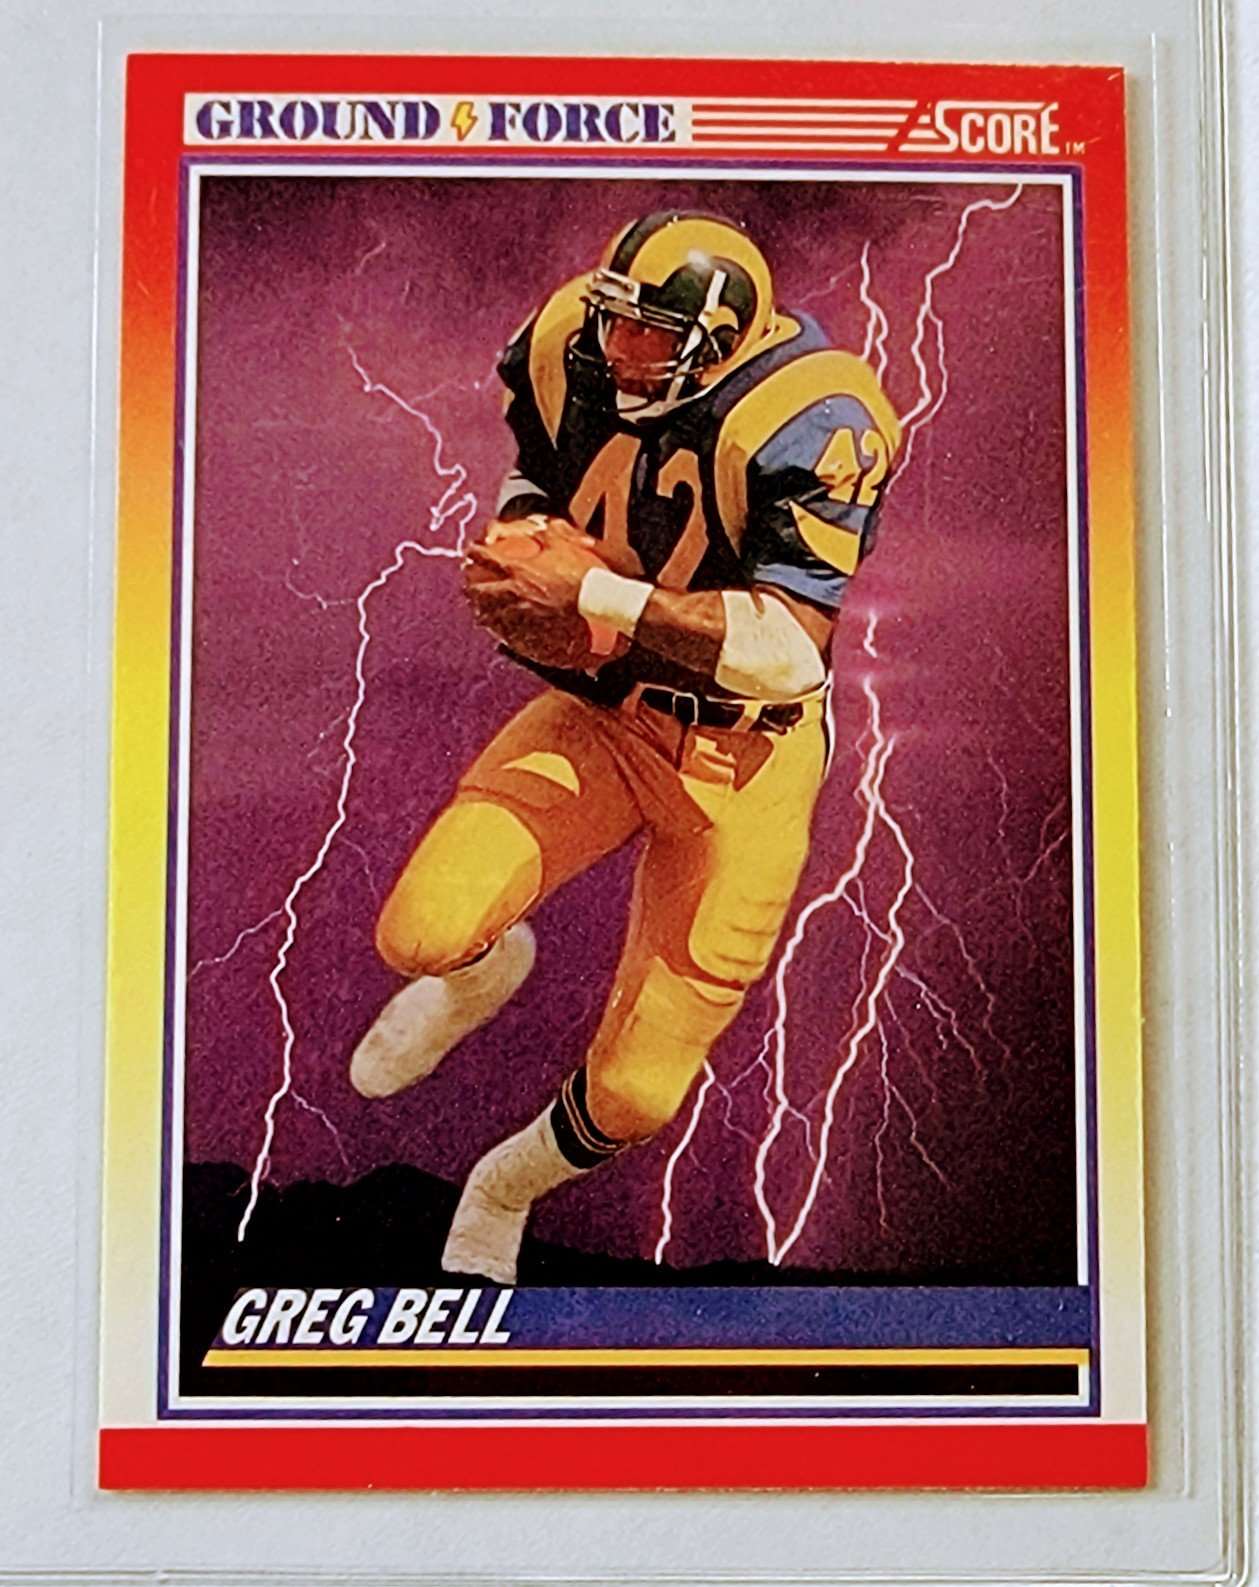 1990 Score Greg Bell Ground Force Football Card AVM1 simple Xclusive Collectibles   